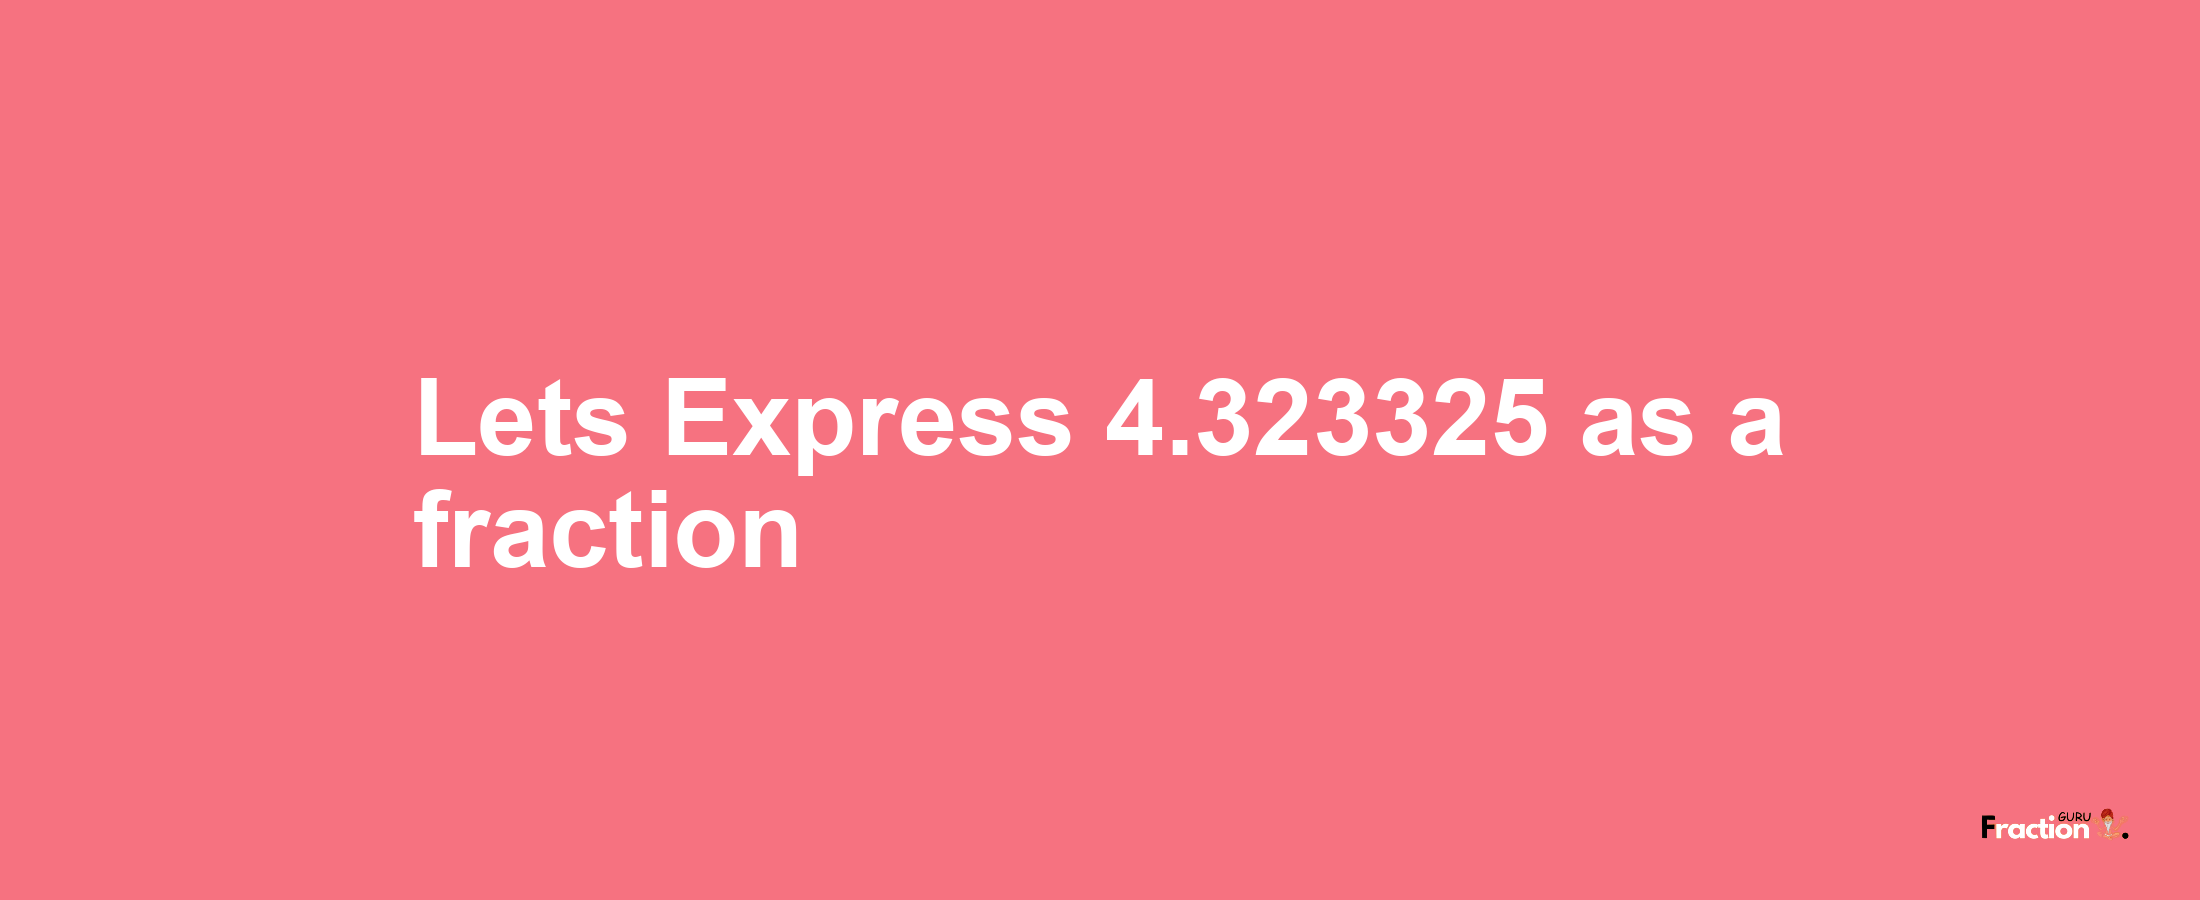 Lets Express 4.323325 as afraction